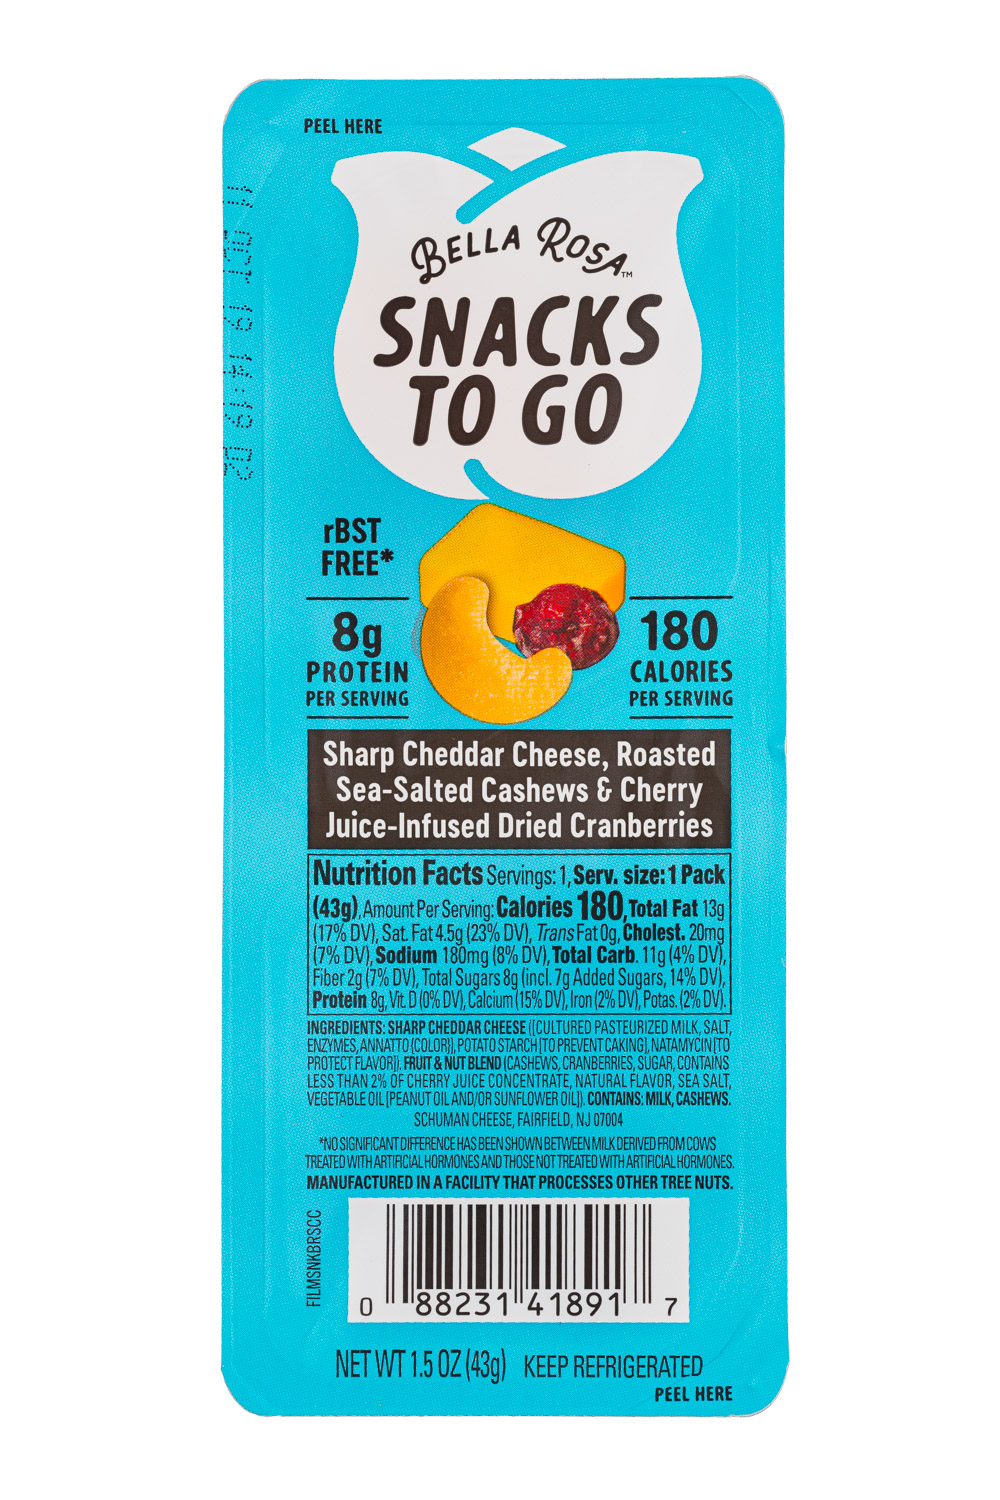 Sharp Cheddar Cheese, Roasted Sea-Salted Cashews & Cherry Juice-Infused Dried Cranberries